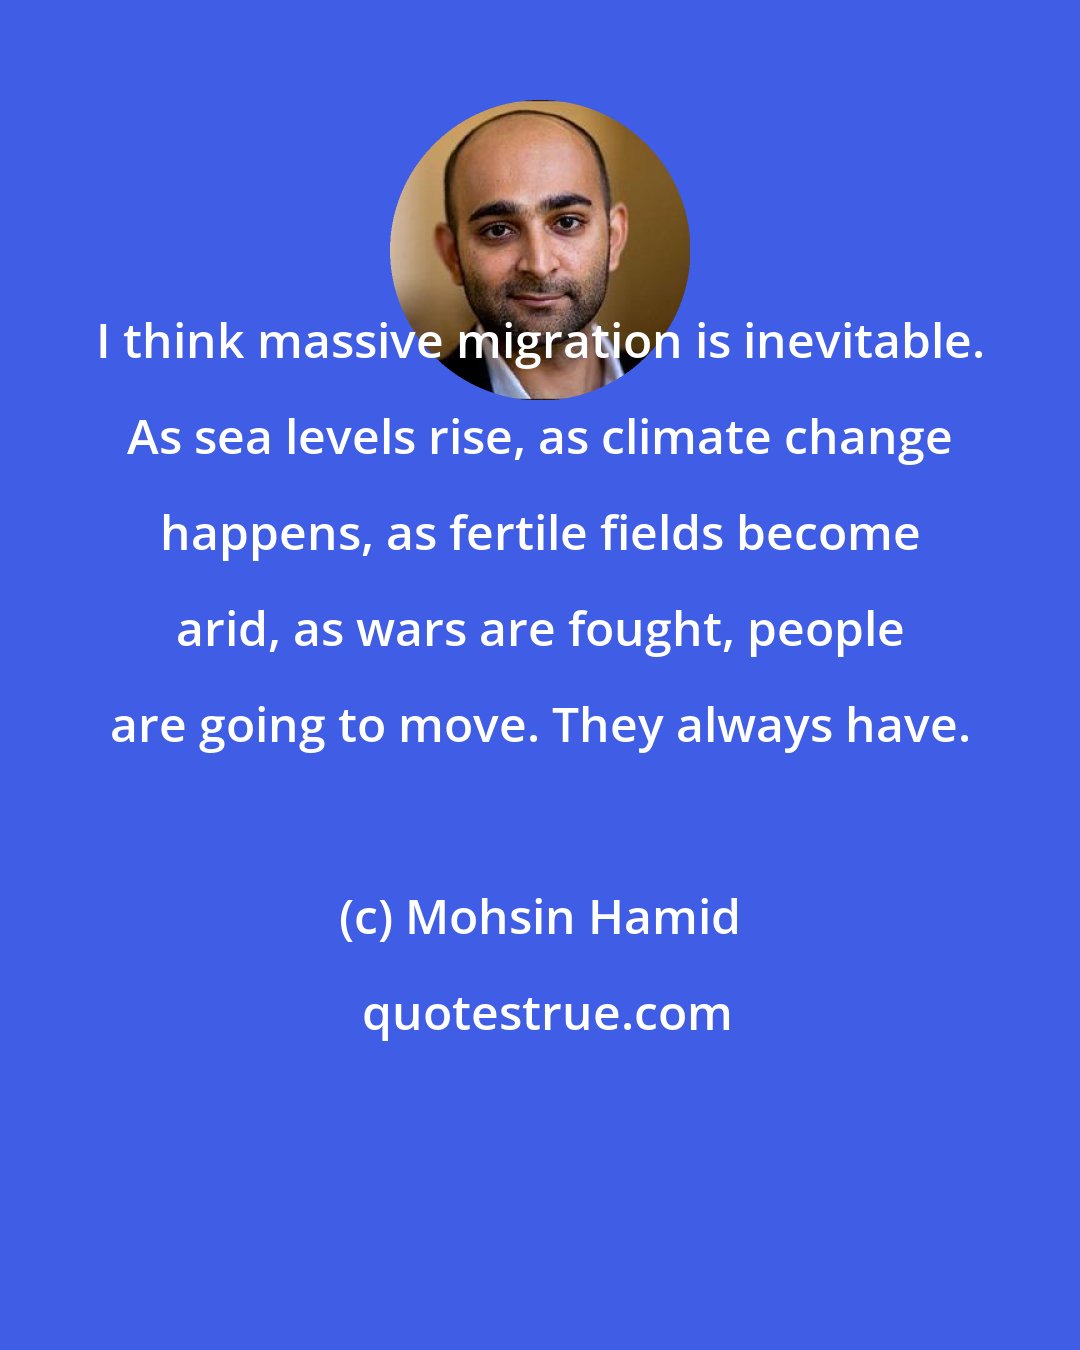 Mohsin Hamid: I think massive migration is inevitable. As sea levels rise, as climate change happens, as fertile fields become arid, as wars are fought, people are going to move. They always have.